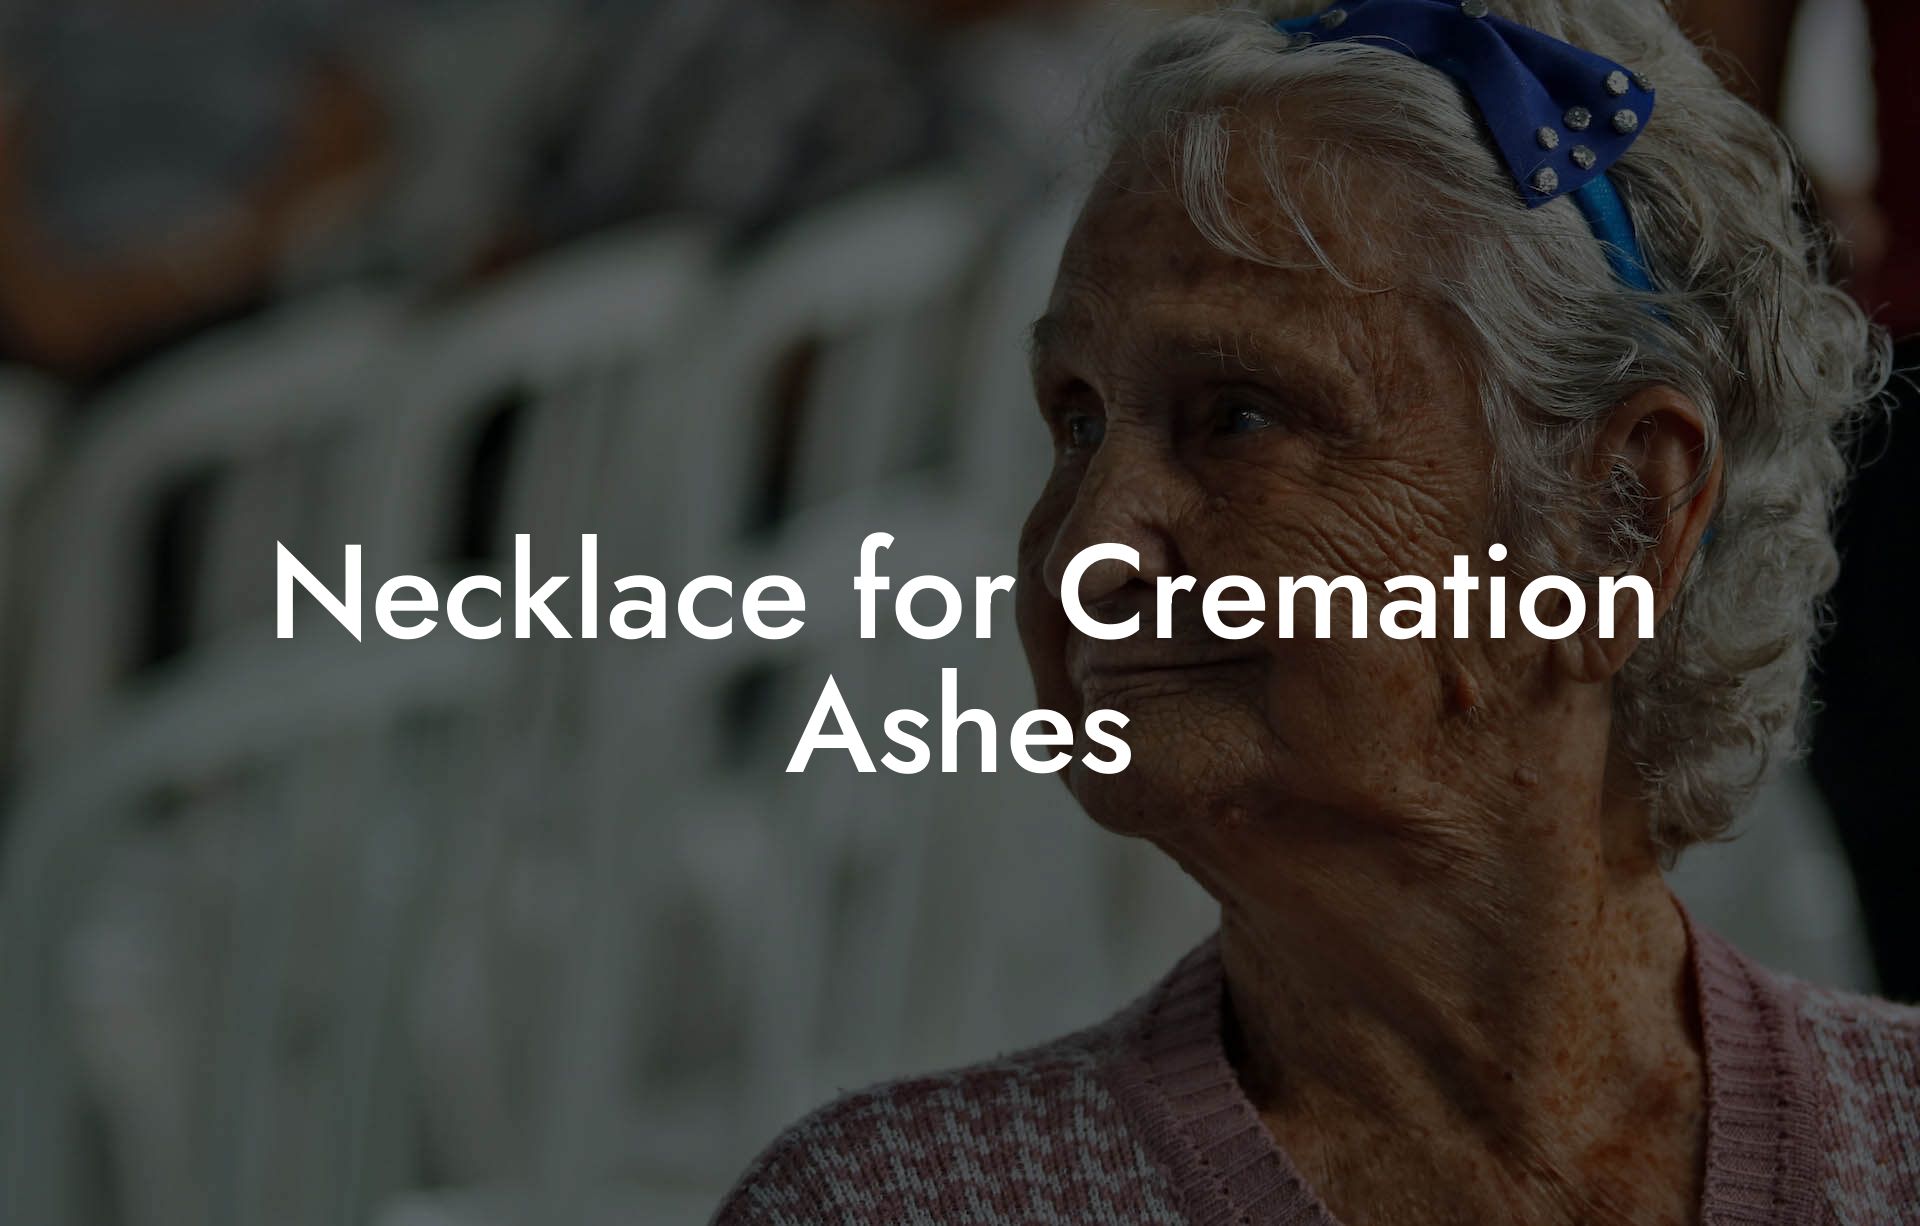 Necklace for Cremation Ashes